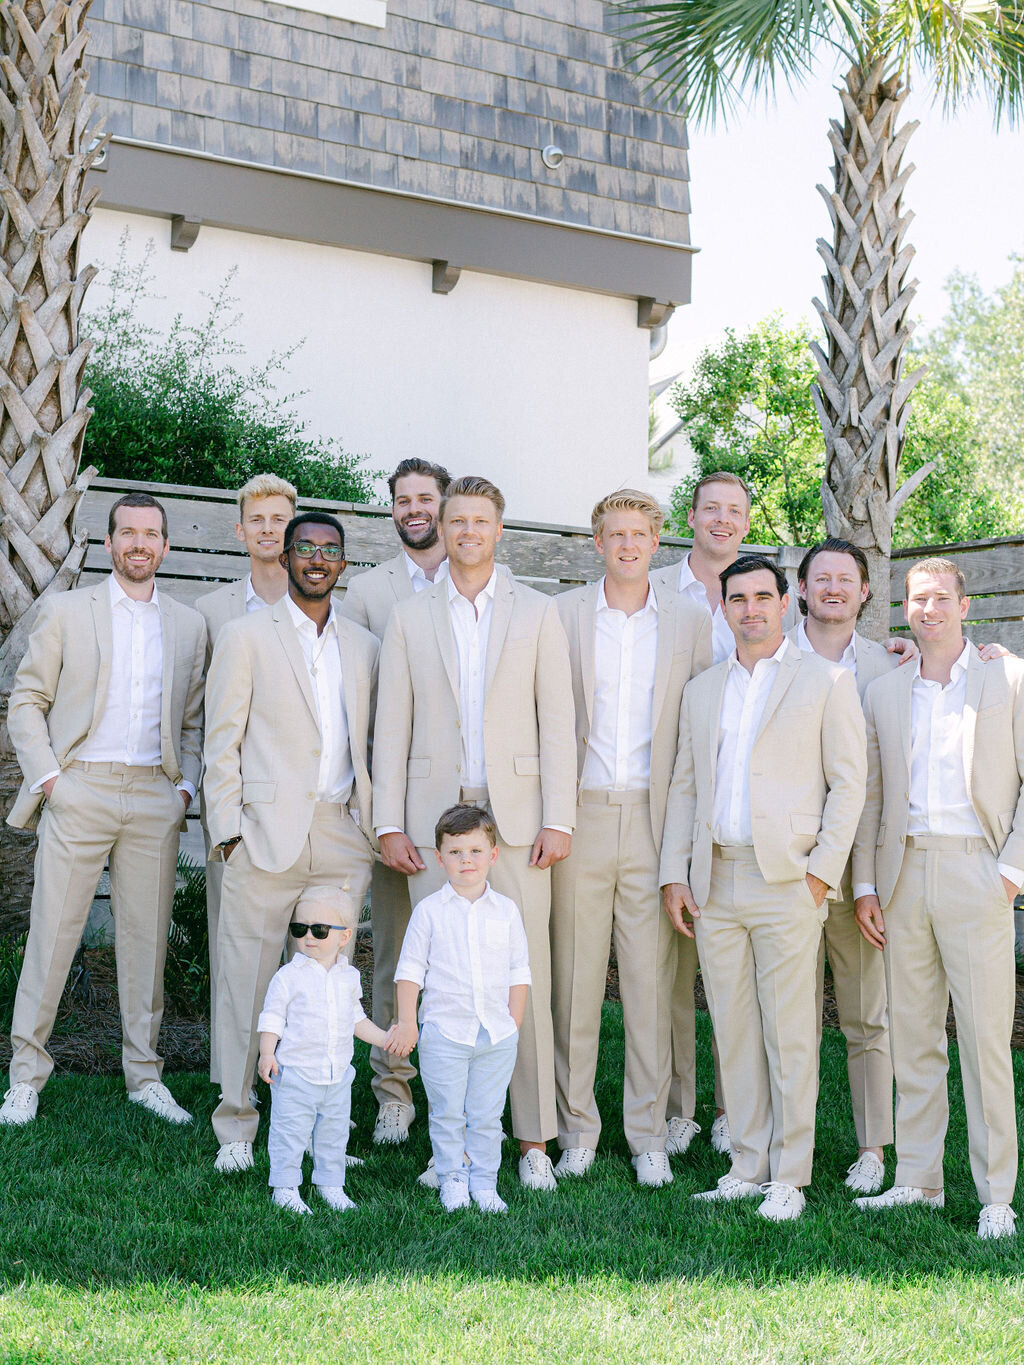 Groom with groomsmen in beige suits and white shirts  at destination wedding Florida